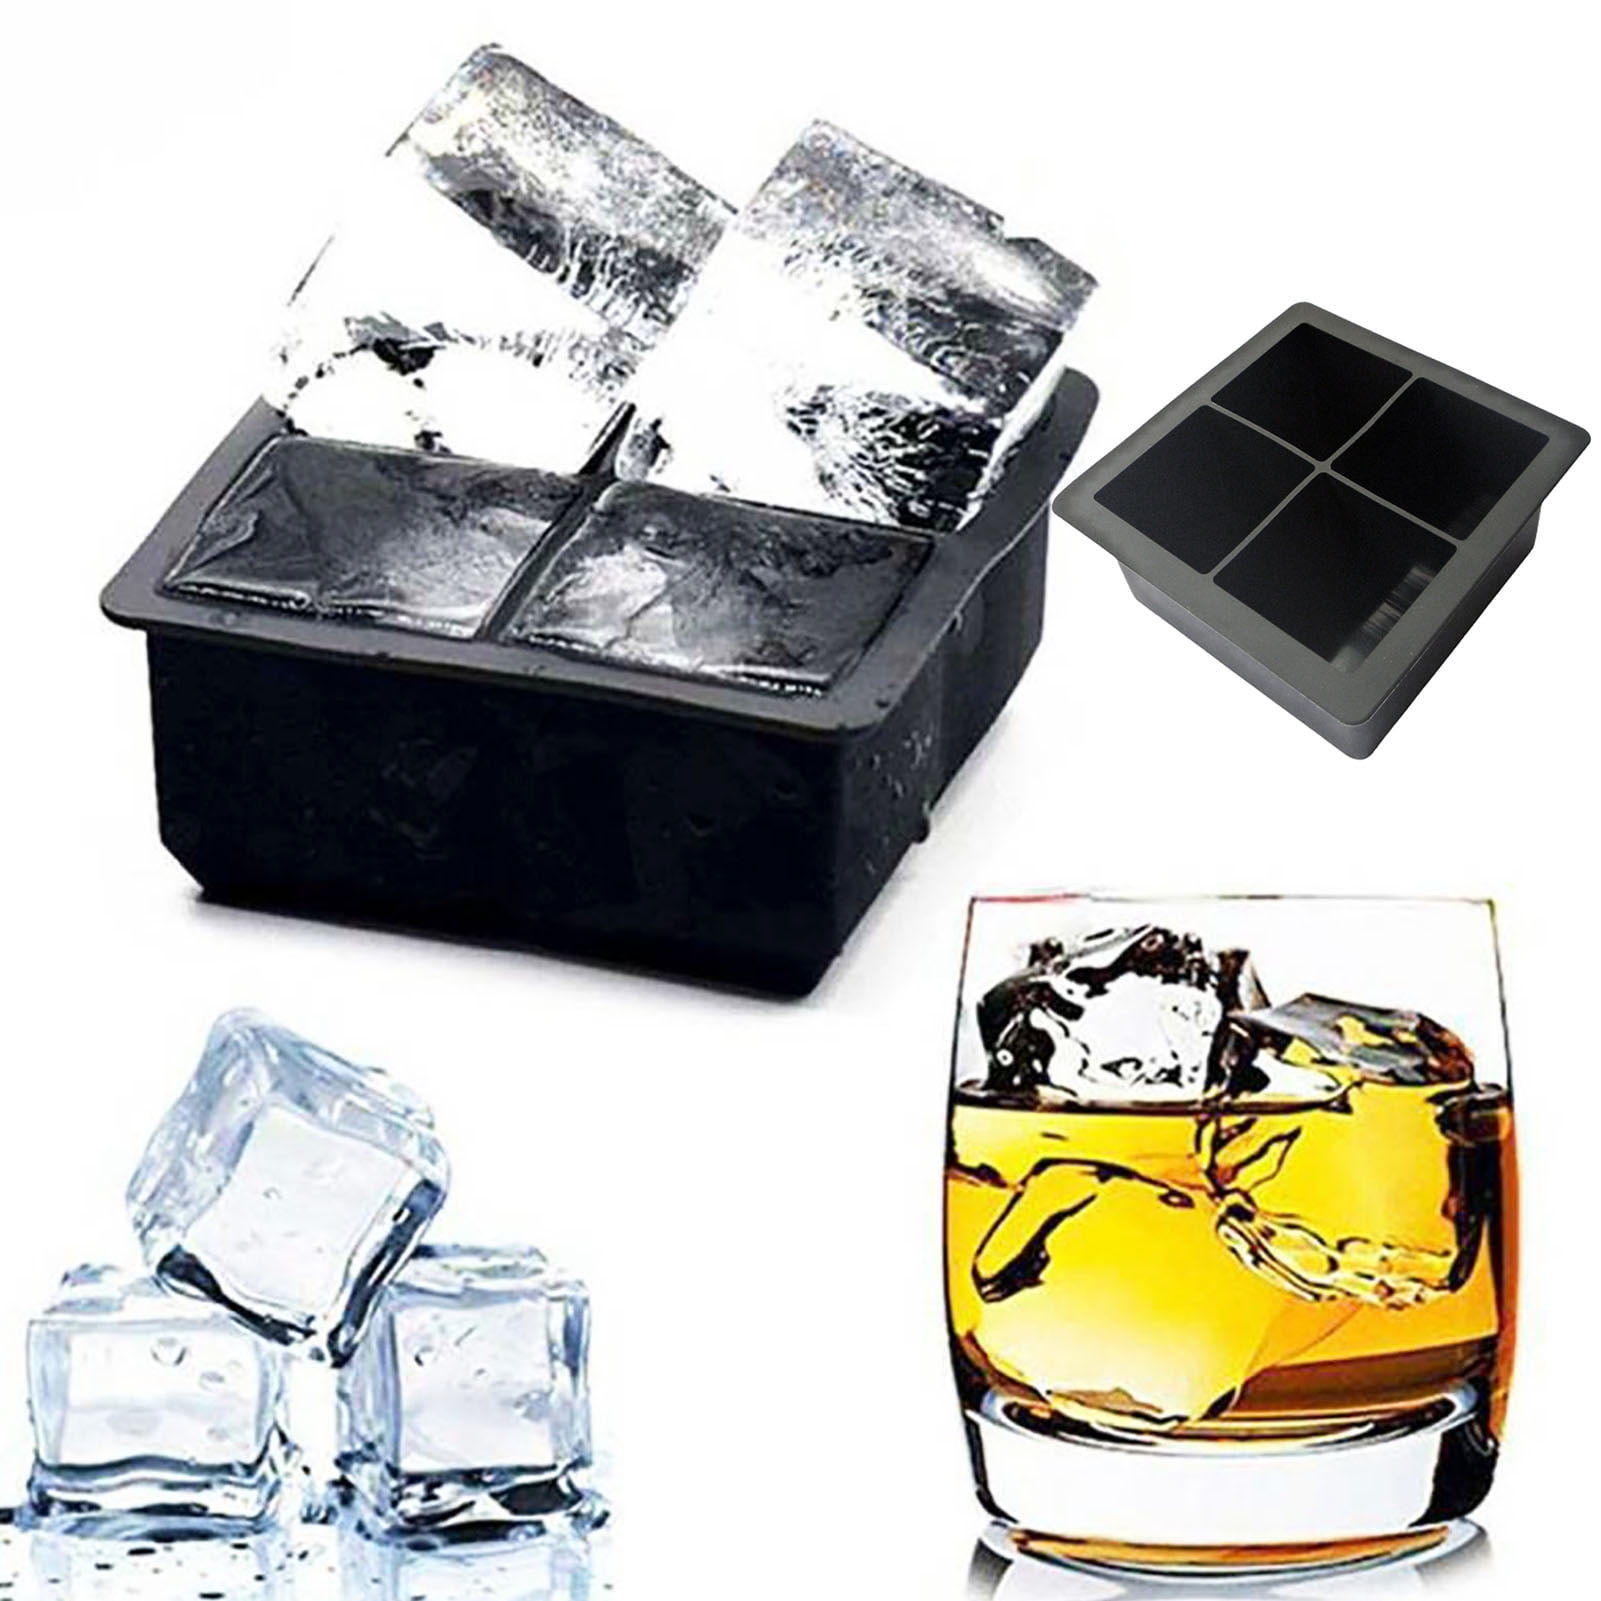 Siligrams Customized Silicone Ice Cube Mold, Custom Ice Cube Mold -  Personalized 1.75-Inch, 2-Inch Ice Mold for Cocktails, Whiskey Ice Cube  Mold with